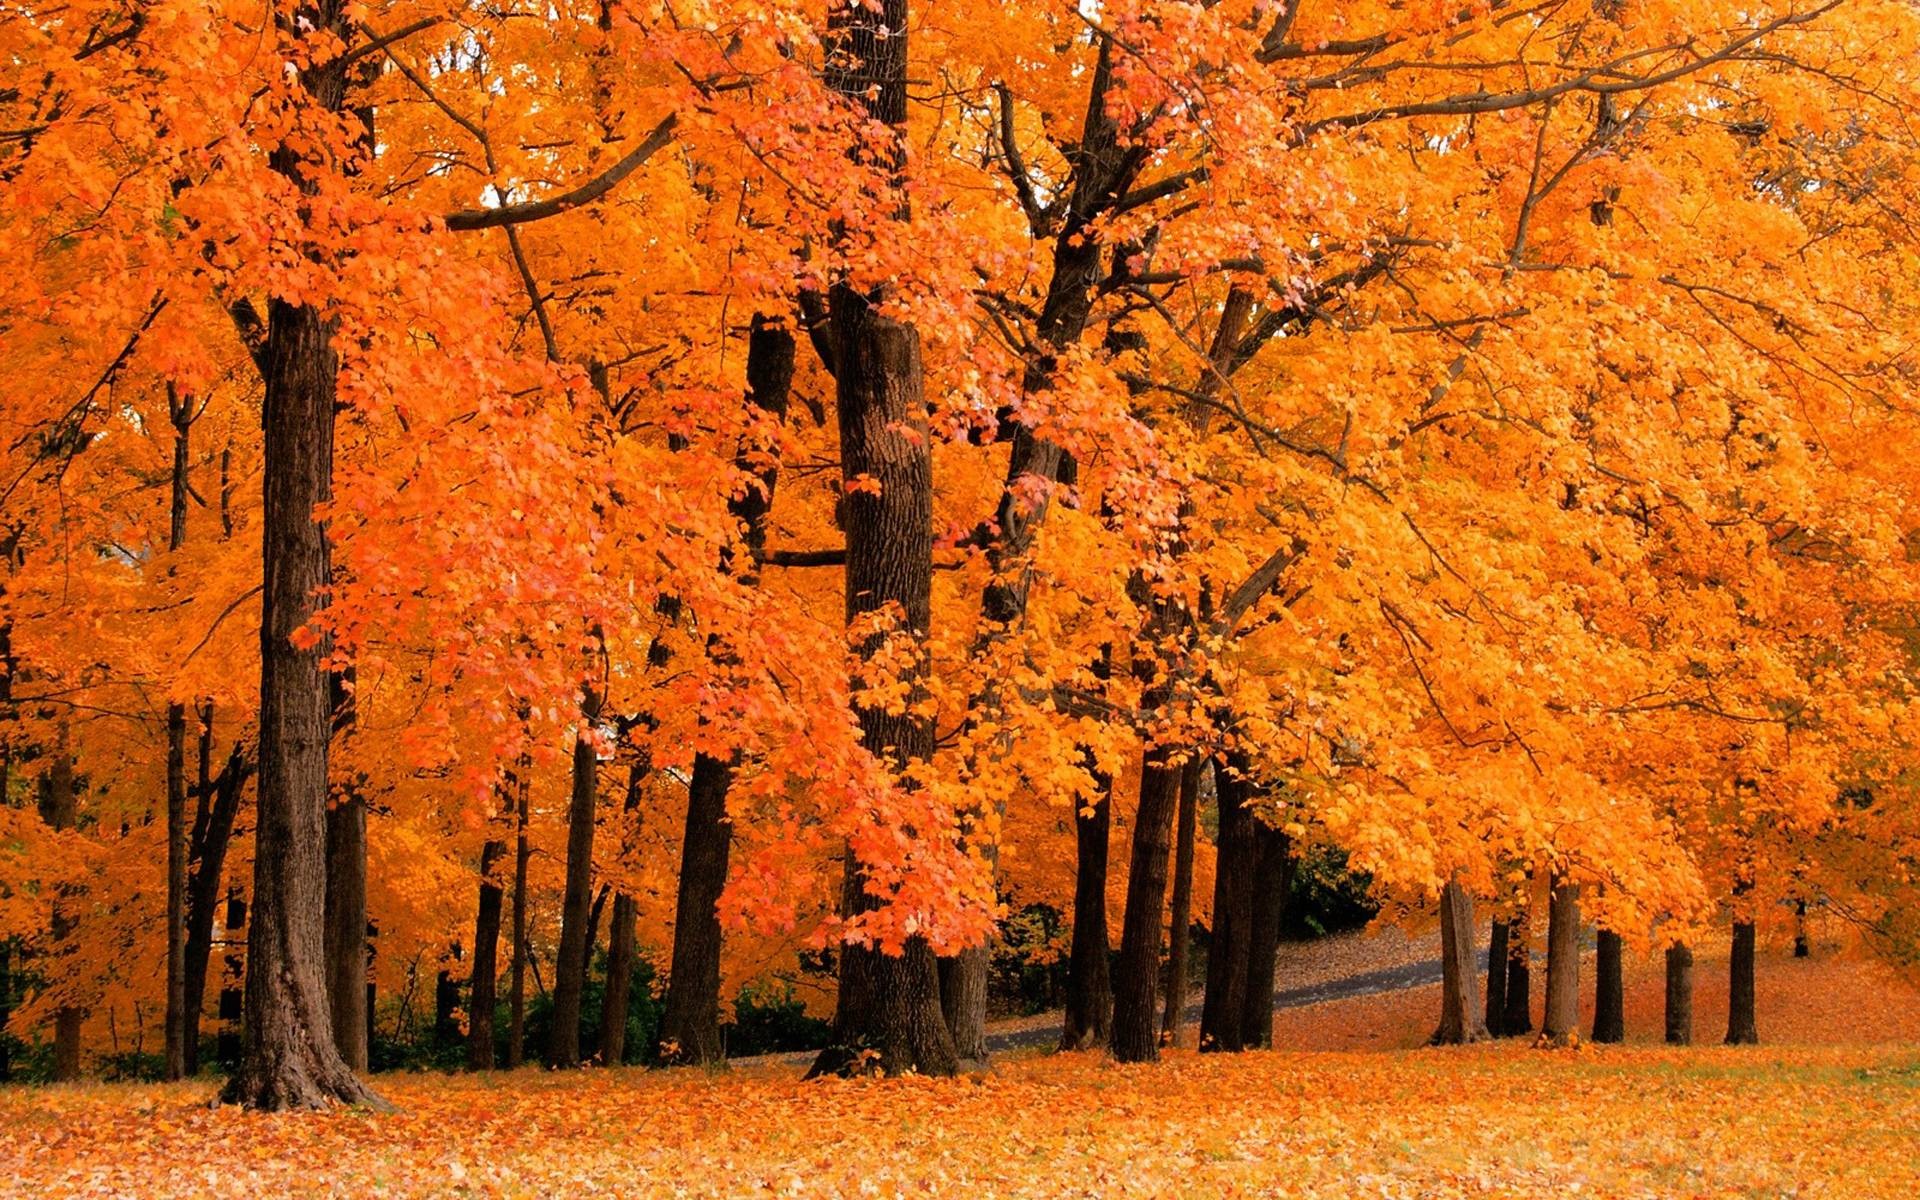 1920x1200 Best 25+ Fall desktop backgrounds ideas on Pinterest | Fall wallpaper  desktop, Fall computer backgrounds and Fall background